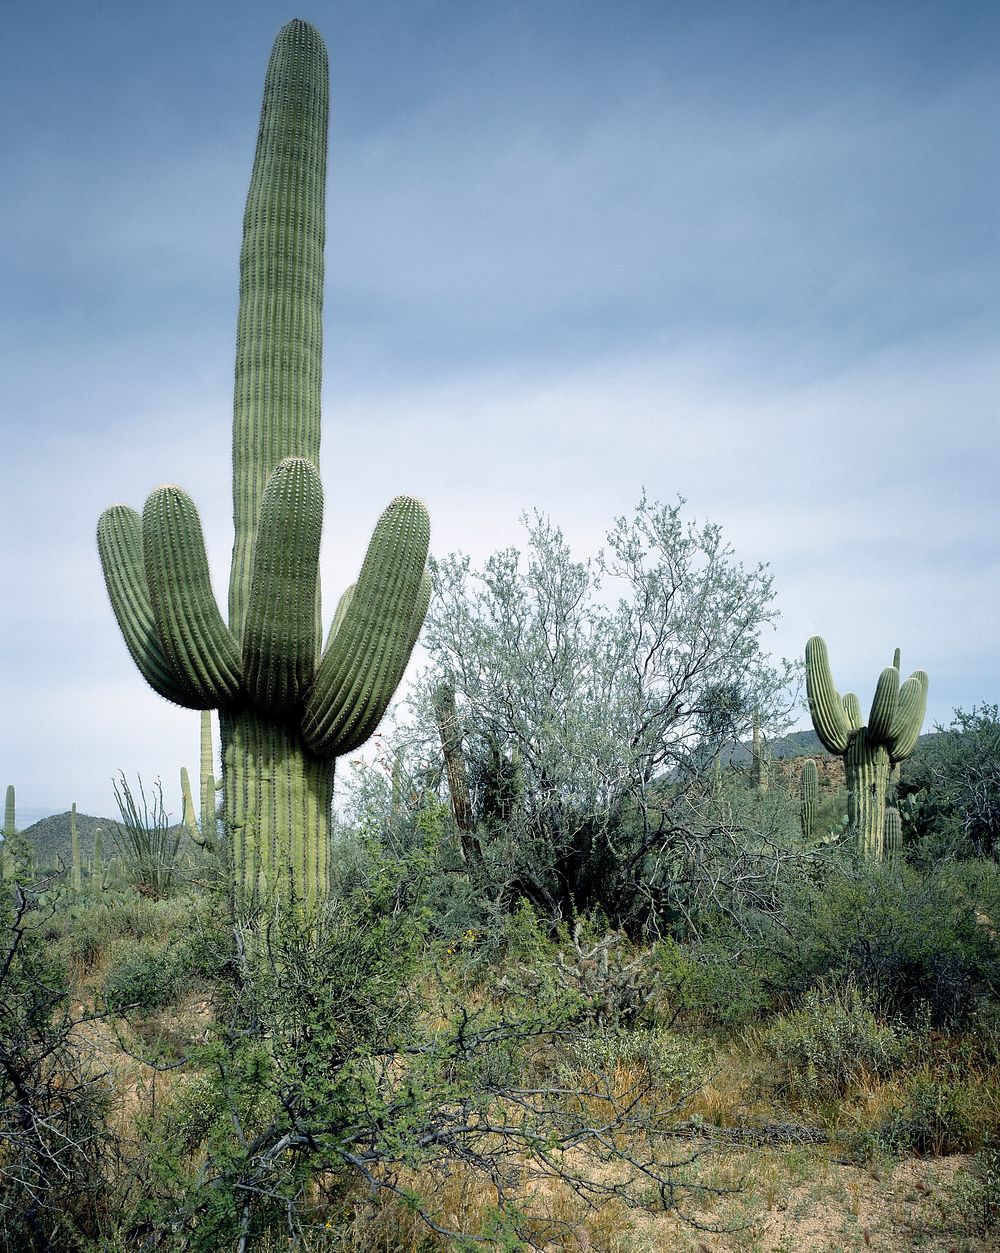 Saguaro Sentinel. Original image from Carol M. Highsmith&rsquo;s America, Library of Congress collection. Digitally enhanced…